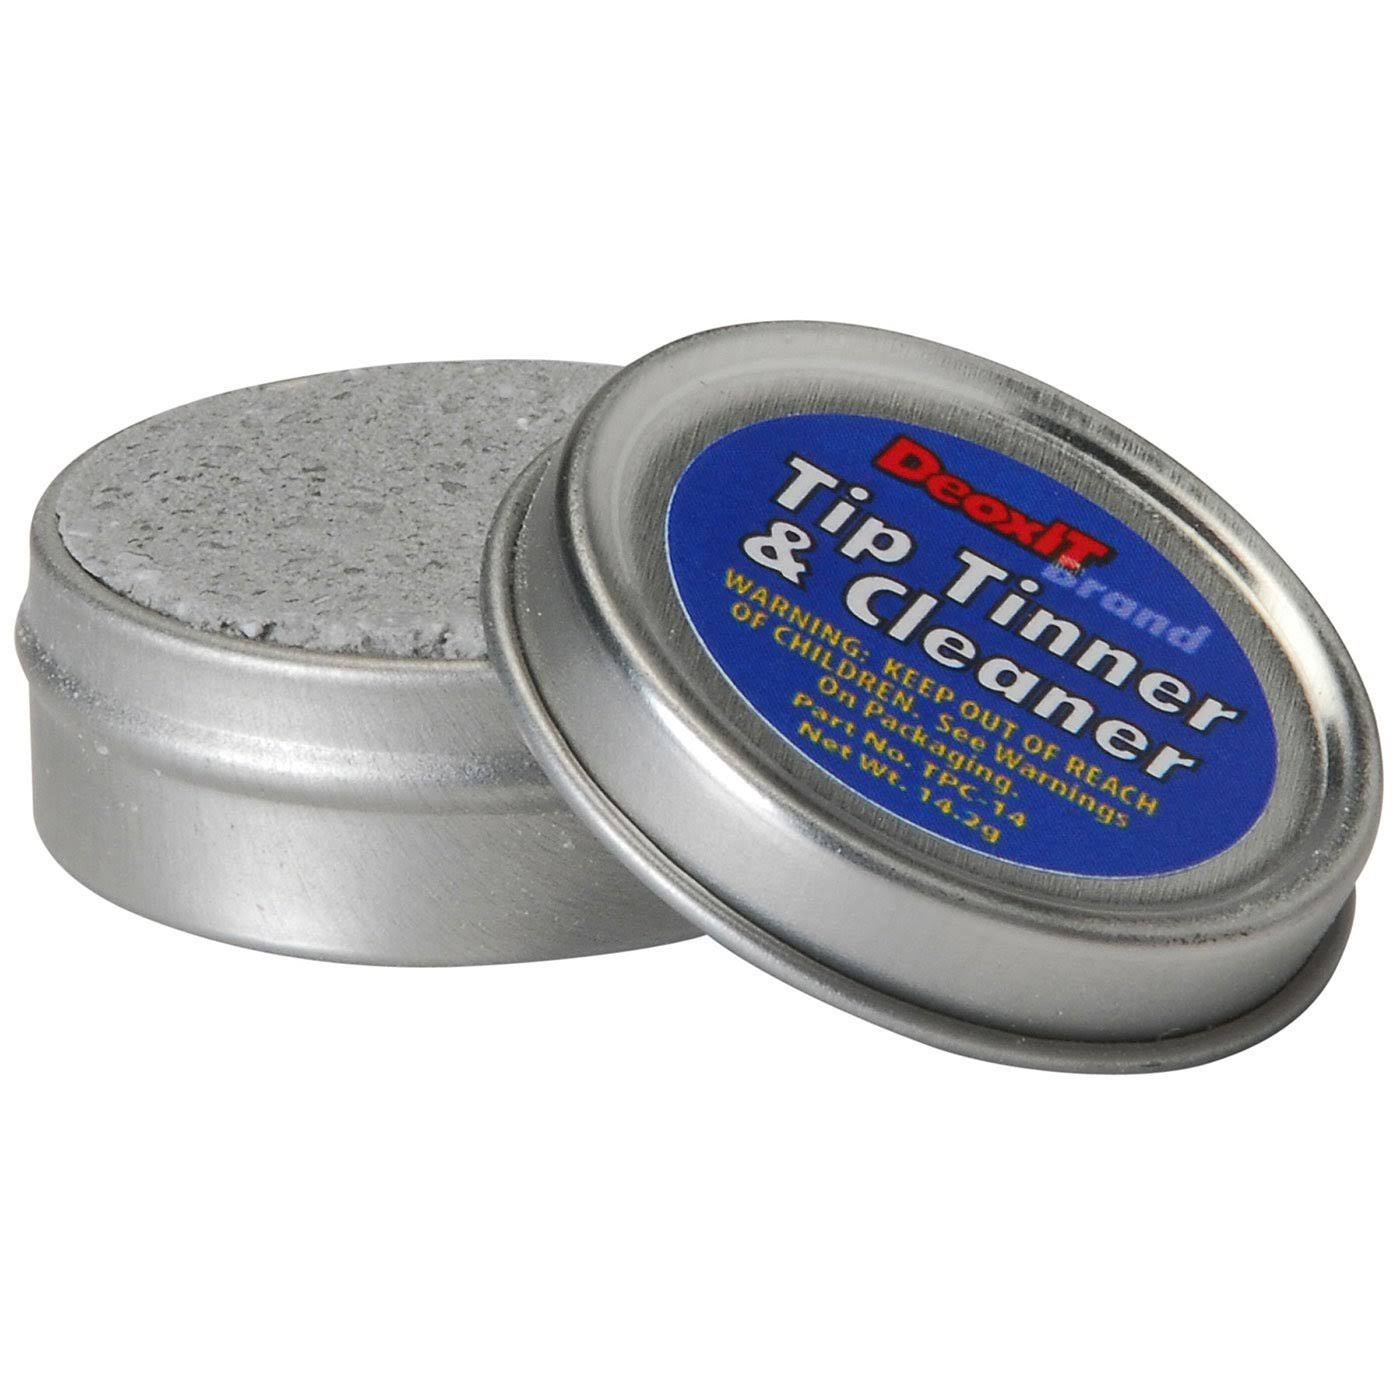 Caig Deoxit Tip Tinner Cleaner/Tinner Compound